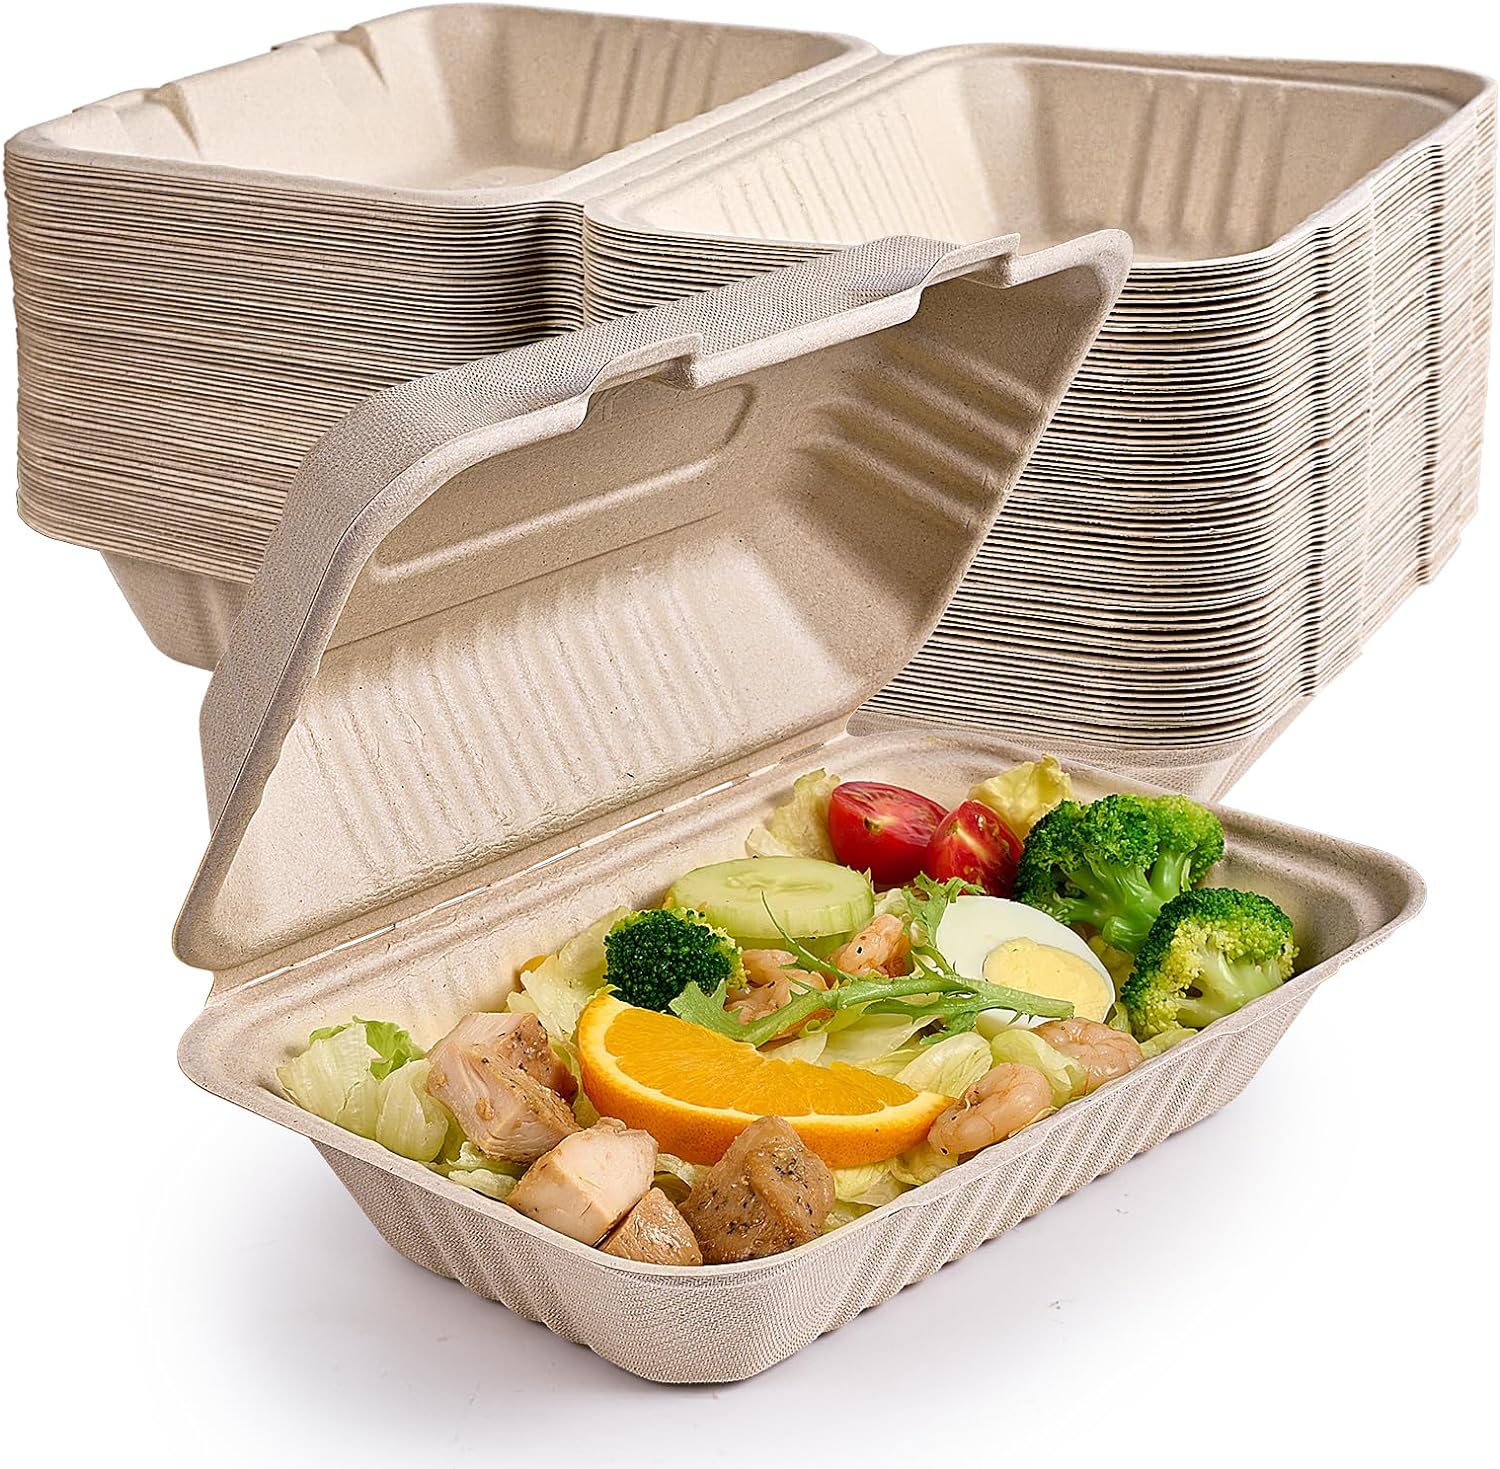 Flash Sale Alert! ECOLipak 75 Pack Clamshell Take Out Food Containers - Save 10% Today!